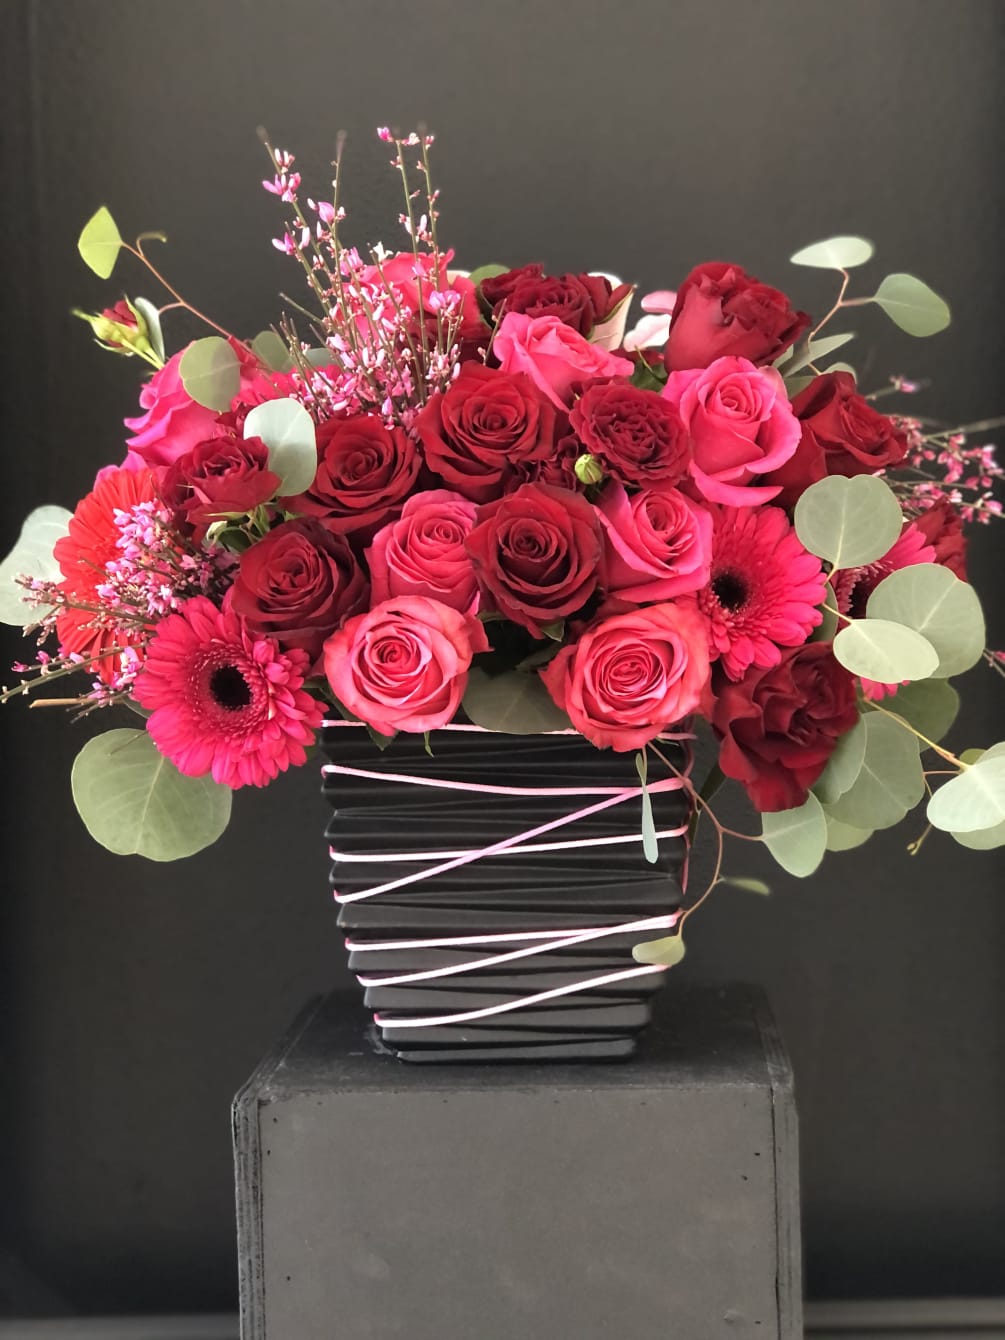 Red and pink roses, daisies beautifully arranged  in black vase, decorated